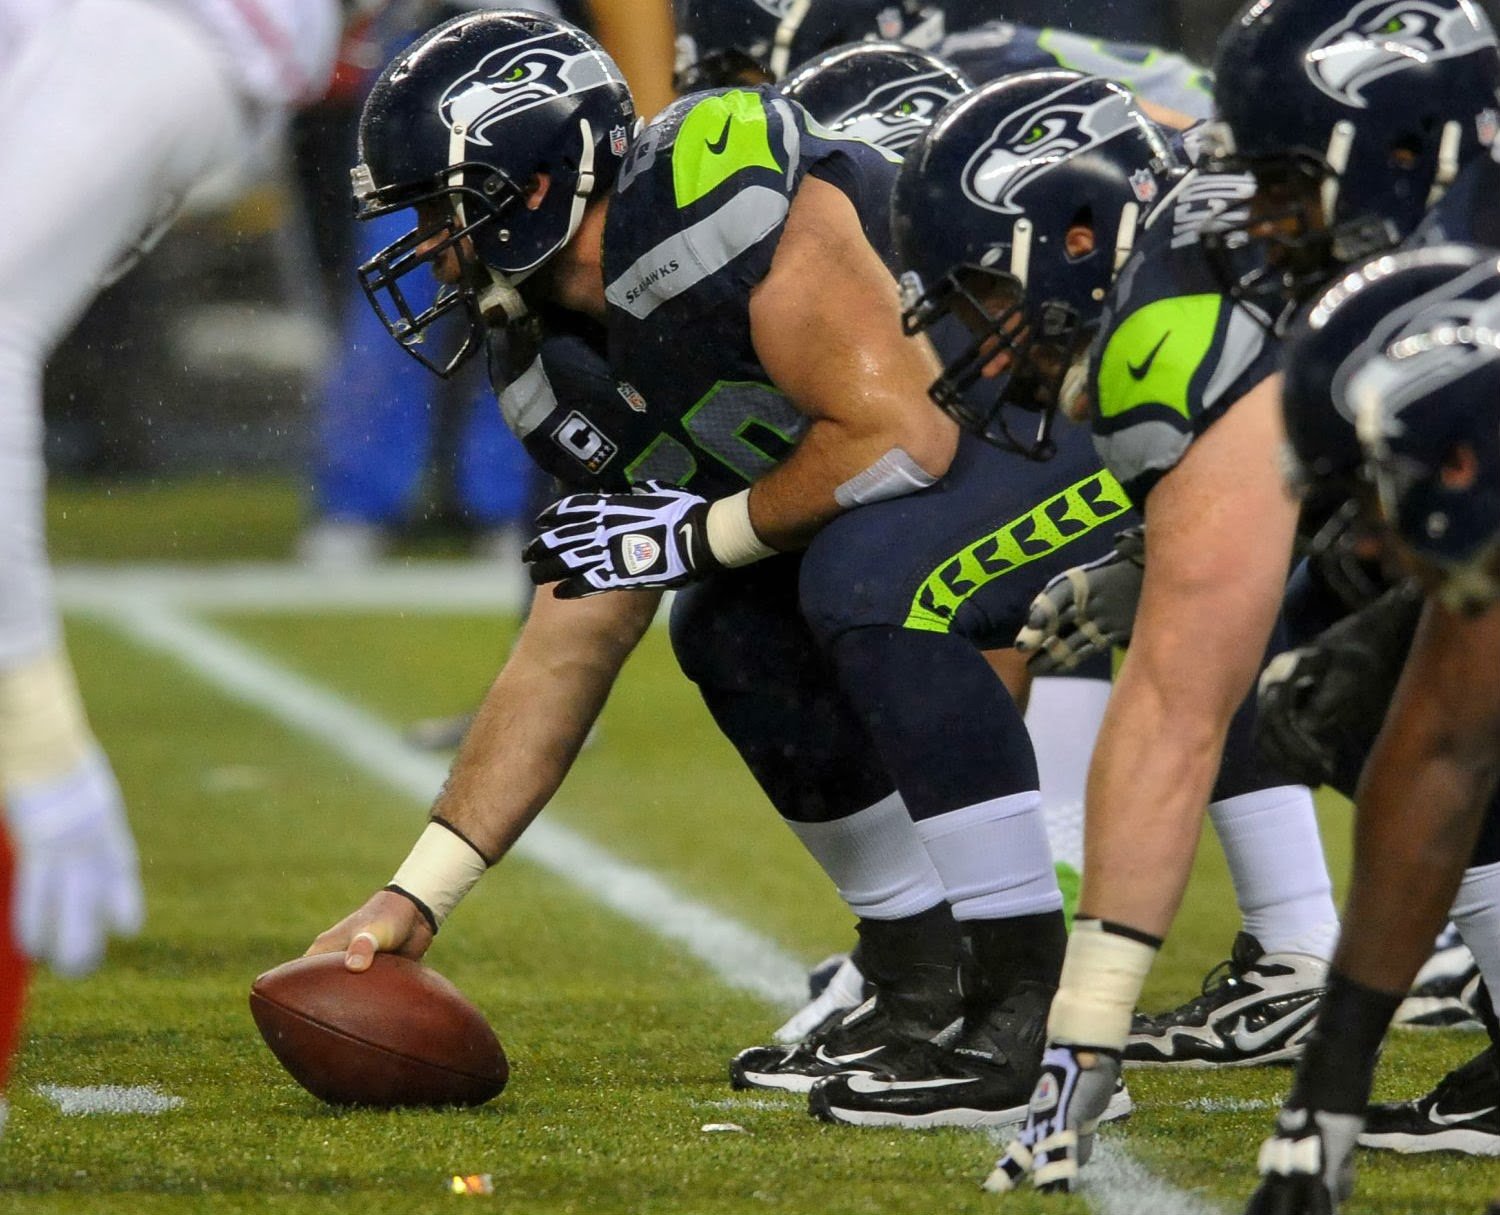 Seahawks HD Wallpaper 2013   HD Wallpapers Window Top Rated Wallpapers